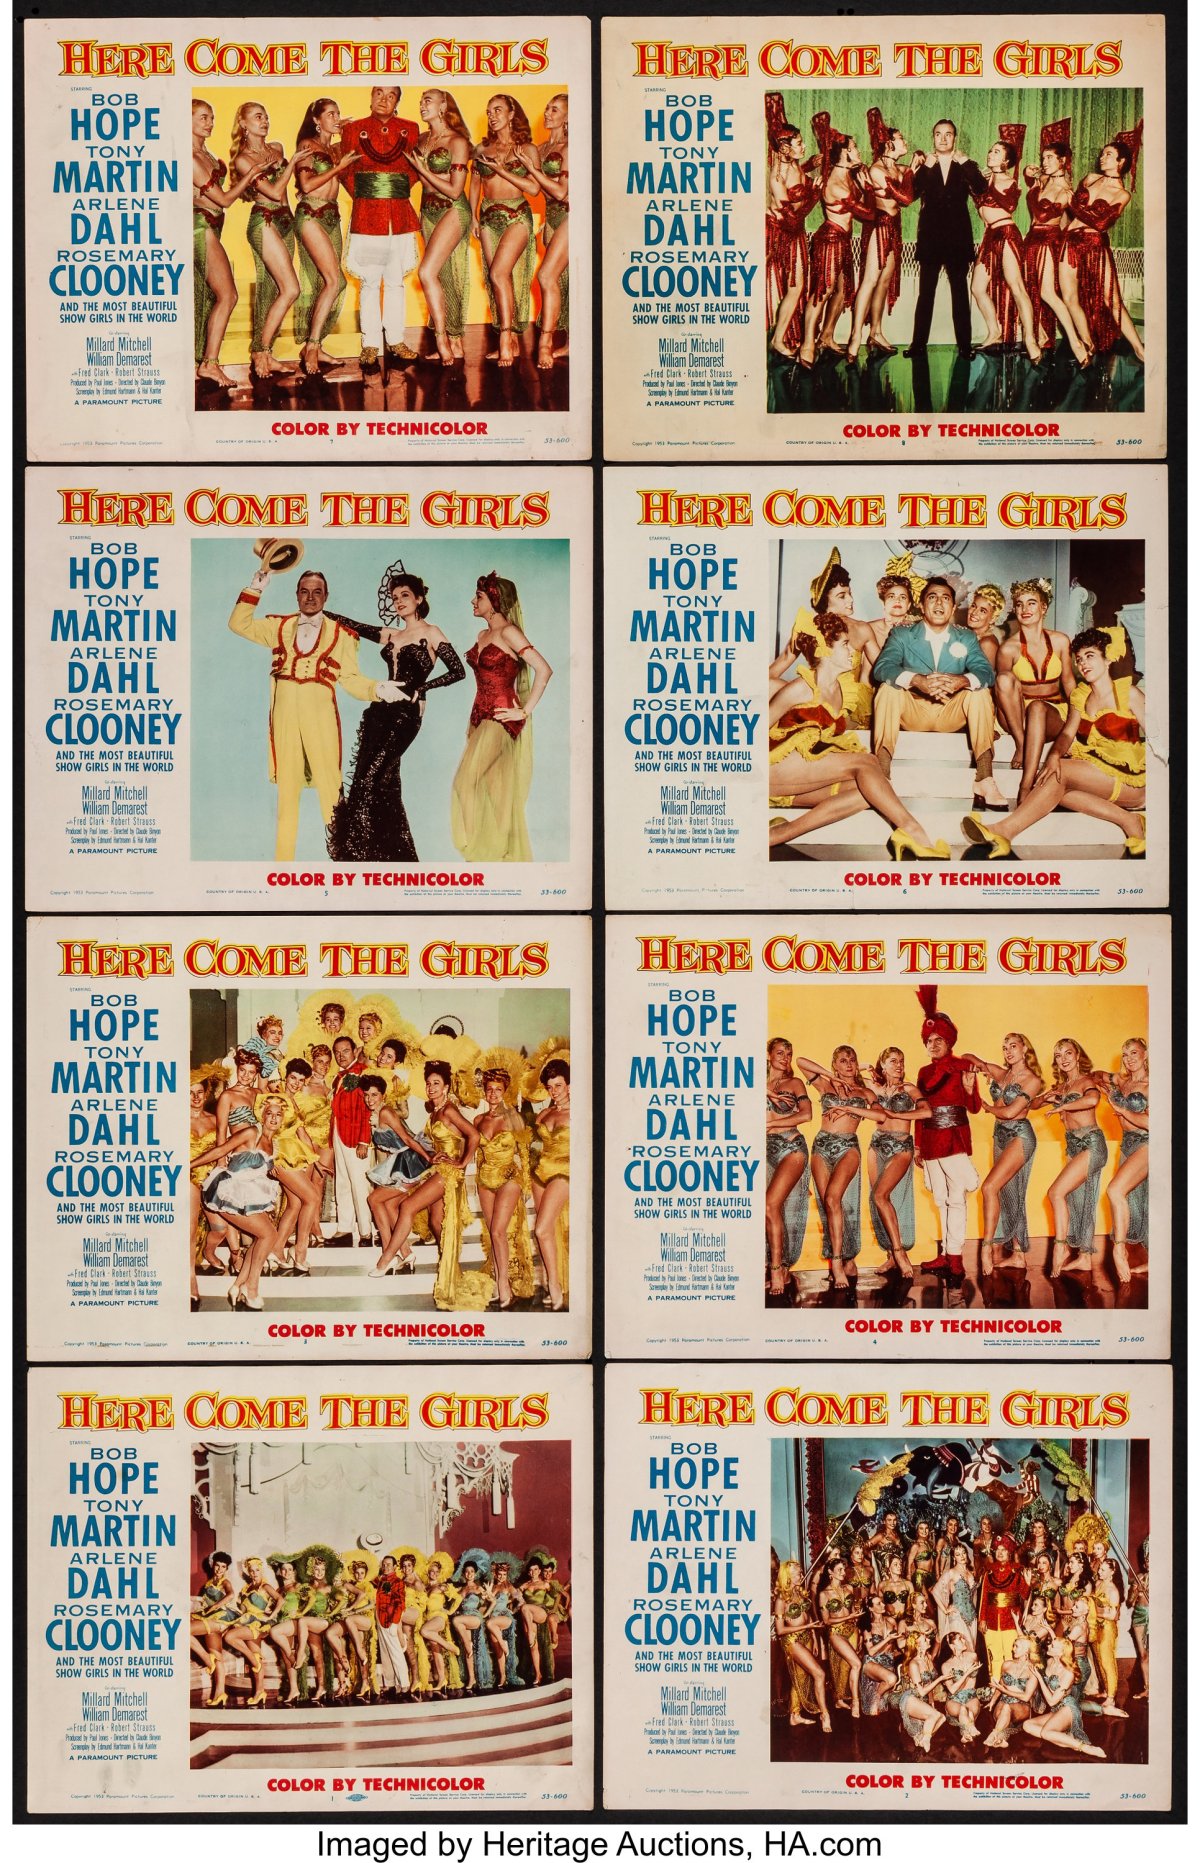 Pepito’s Filmography: “Here Come the Girls” Starring Bob Hope (1953)